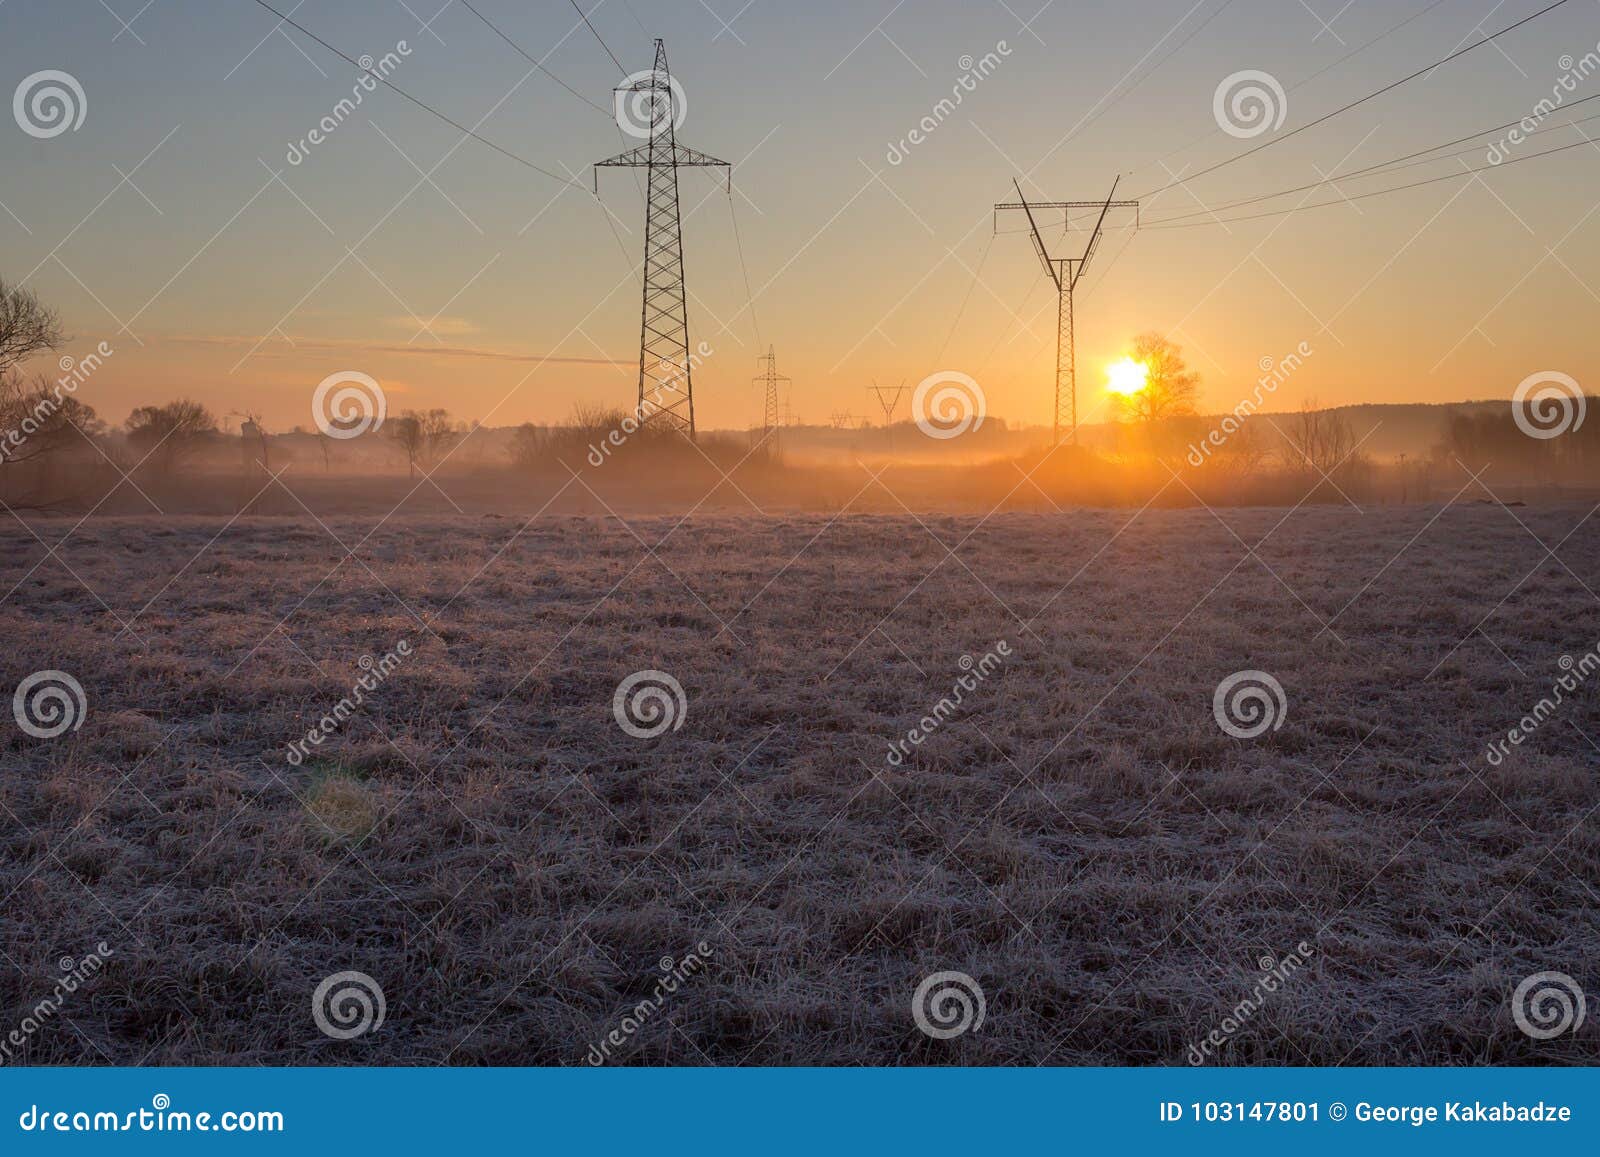 High voltage line supports in fog at frosty spring sunrise morning. High voltage line supports at early morning in frosty field with old grass shining at sunrise